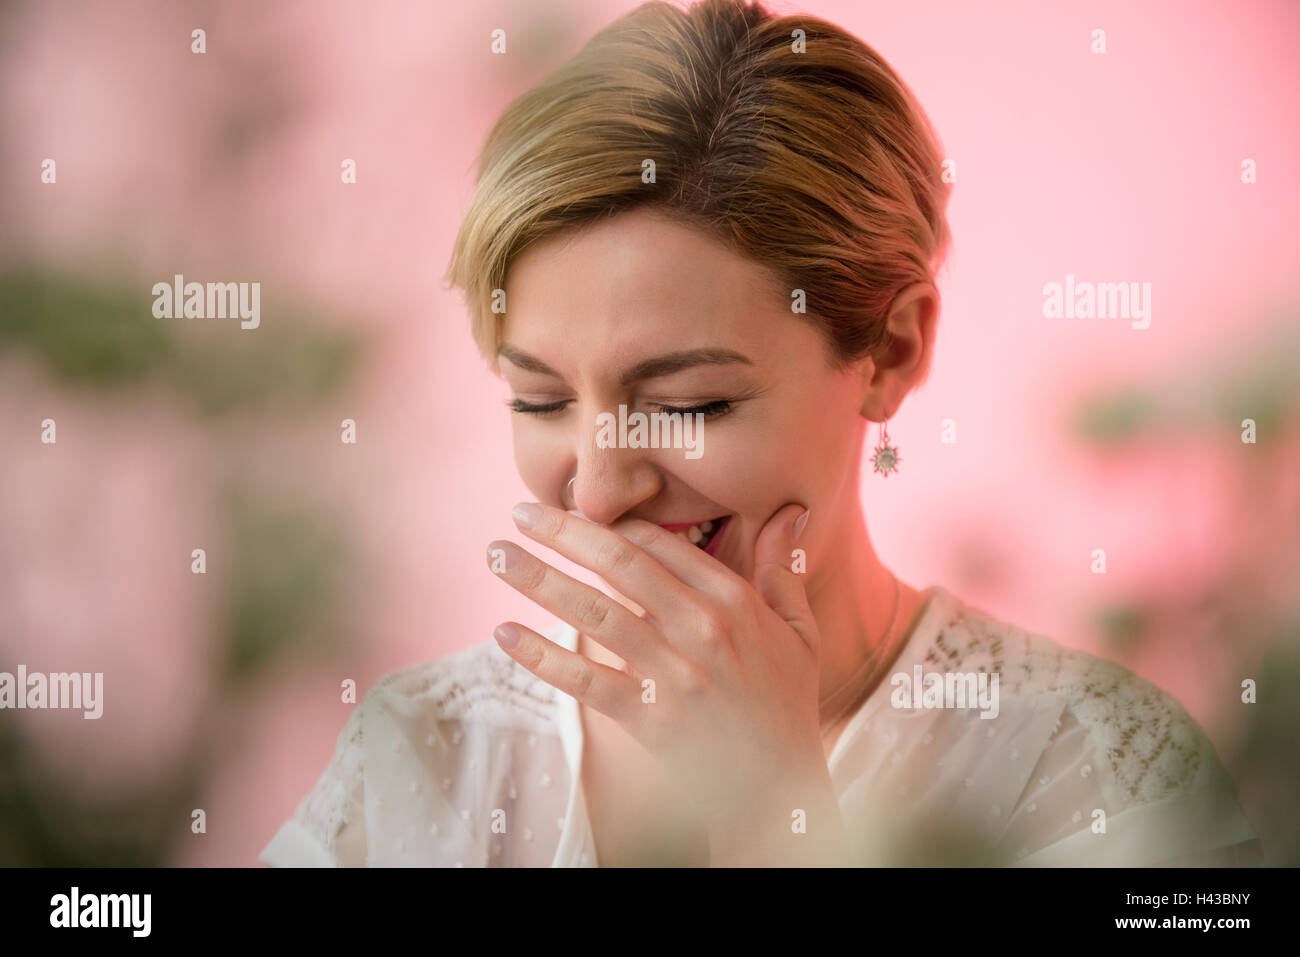 Caucasian woman covering mouth while laughing Stock Photo